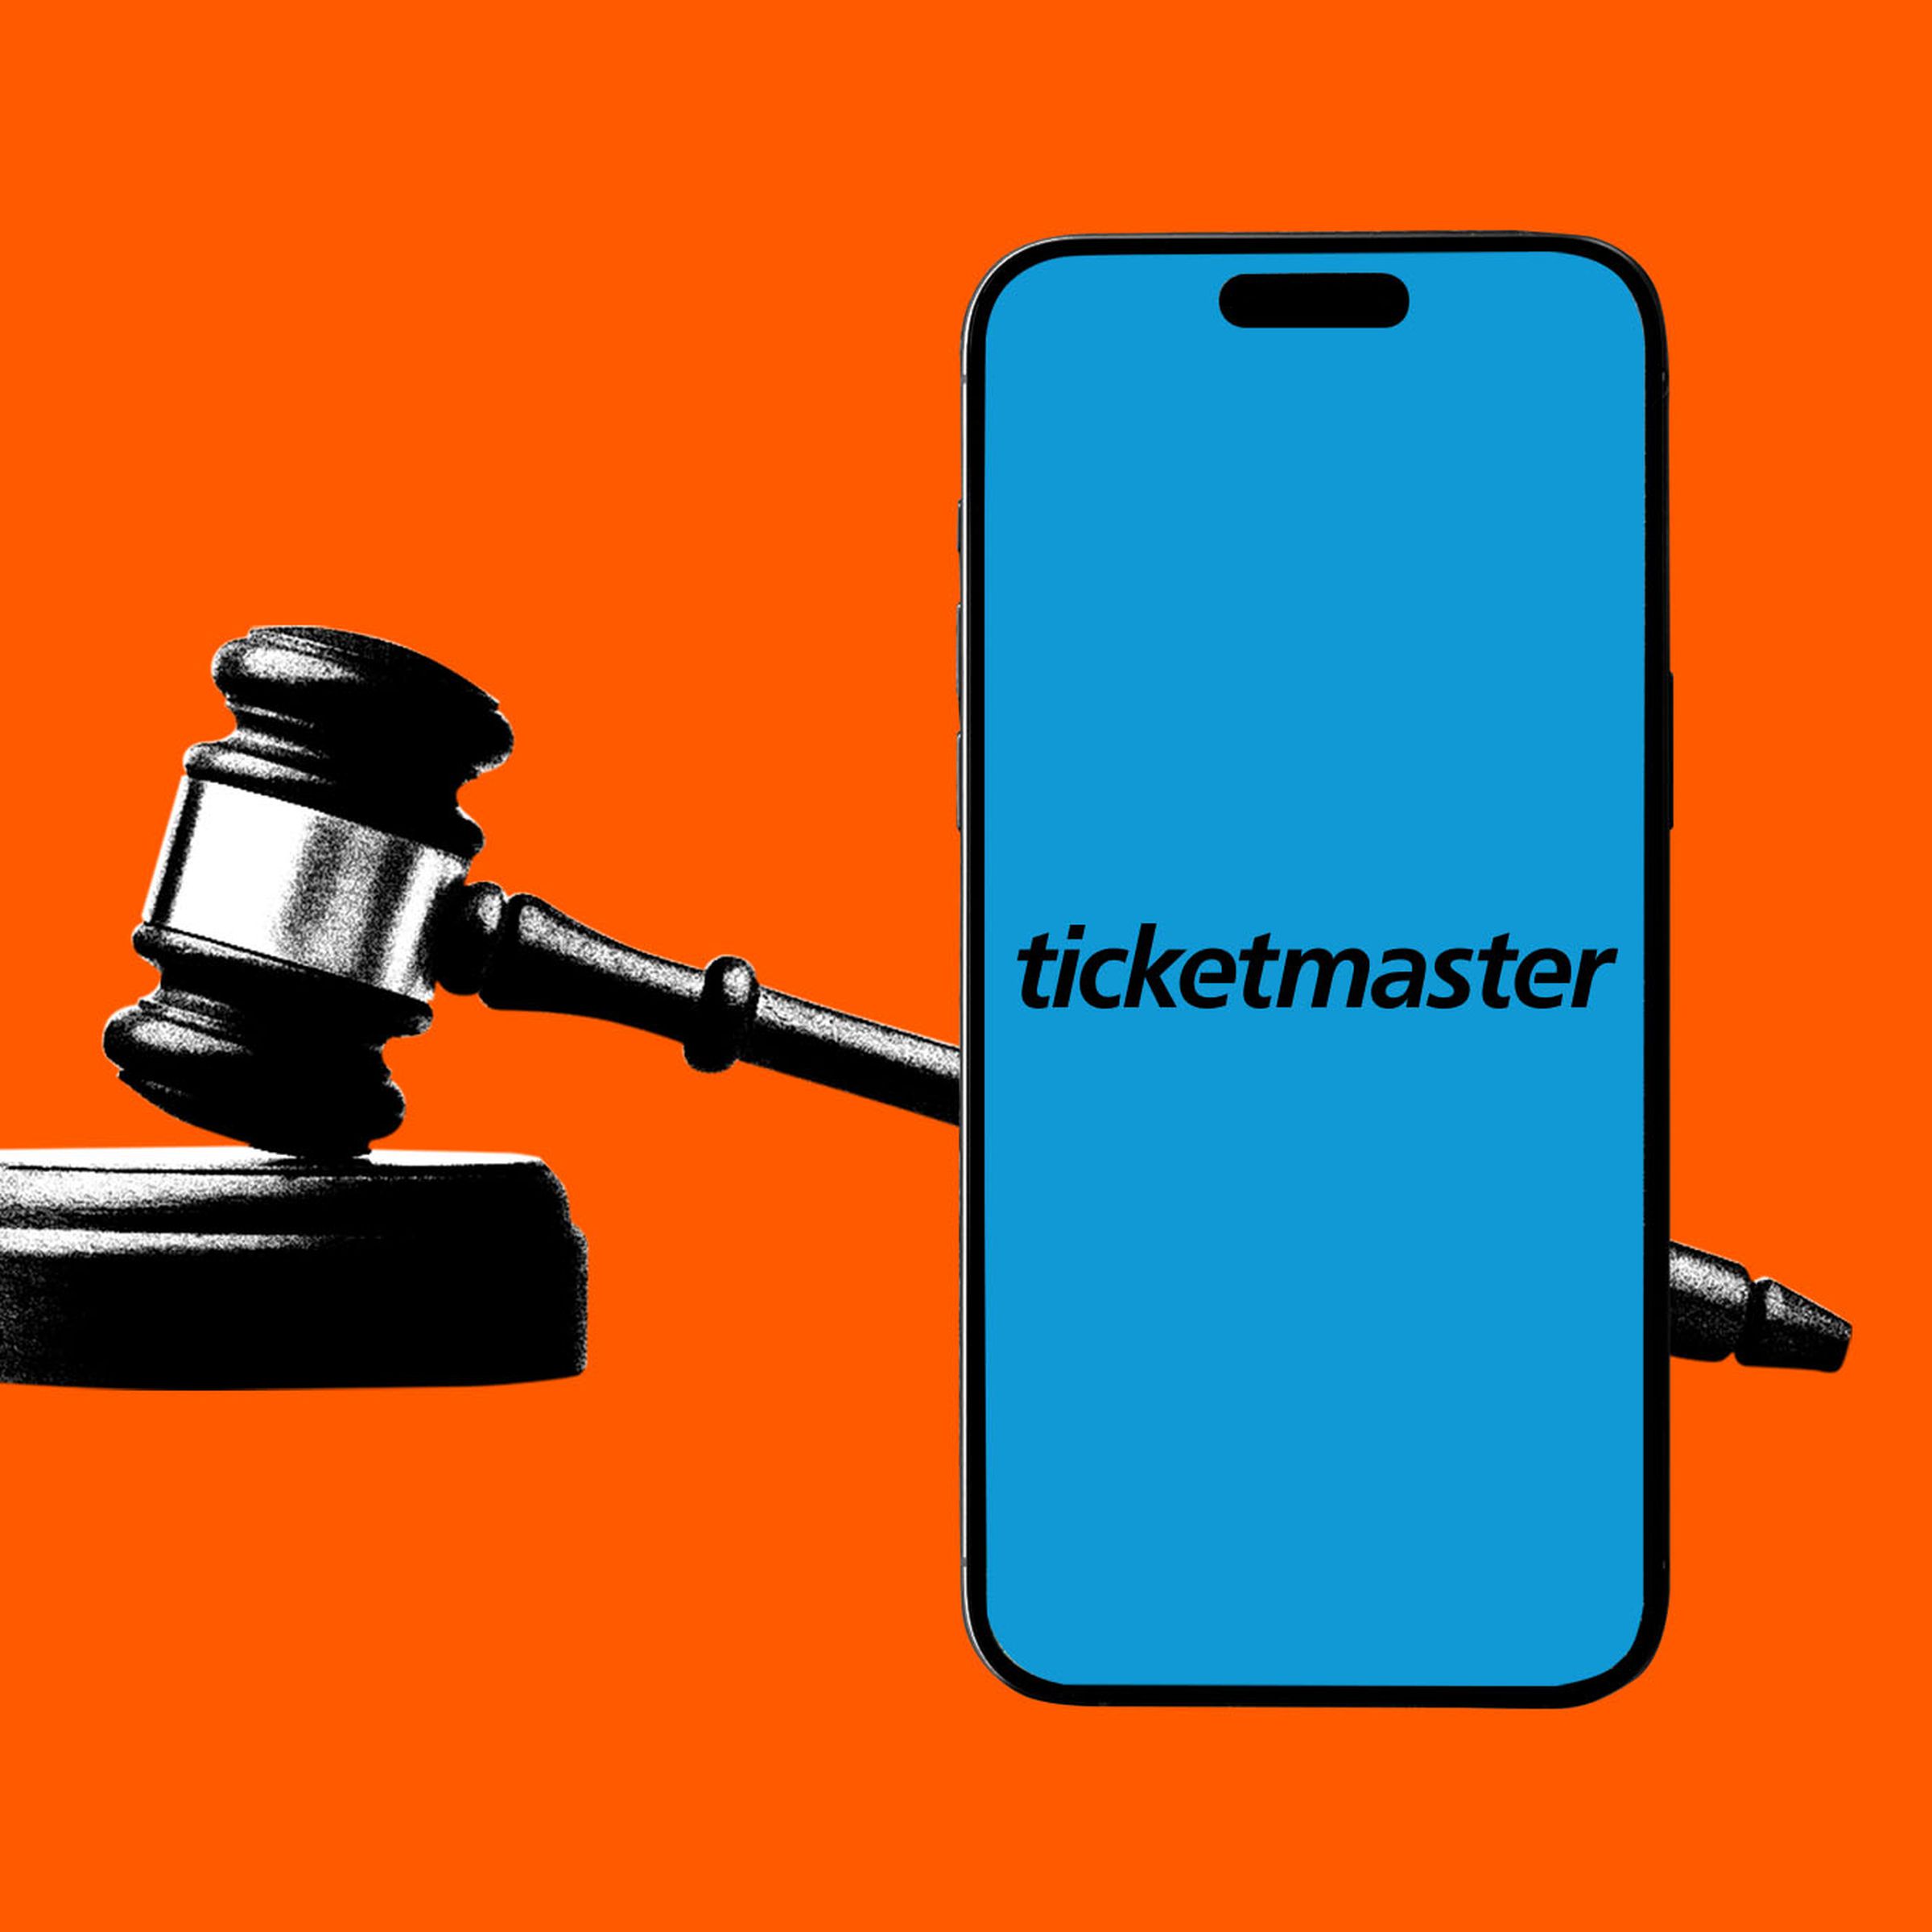 Photo illustration of a gavel next to a phone showing the Ticketmaster logo.